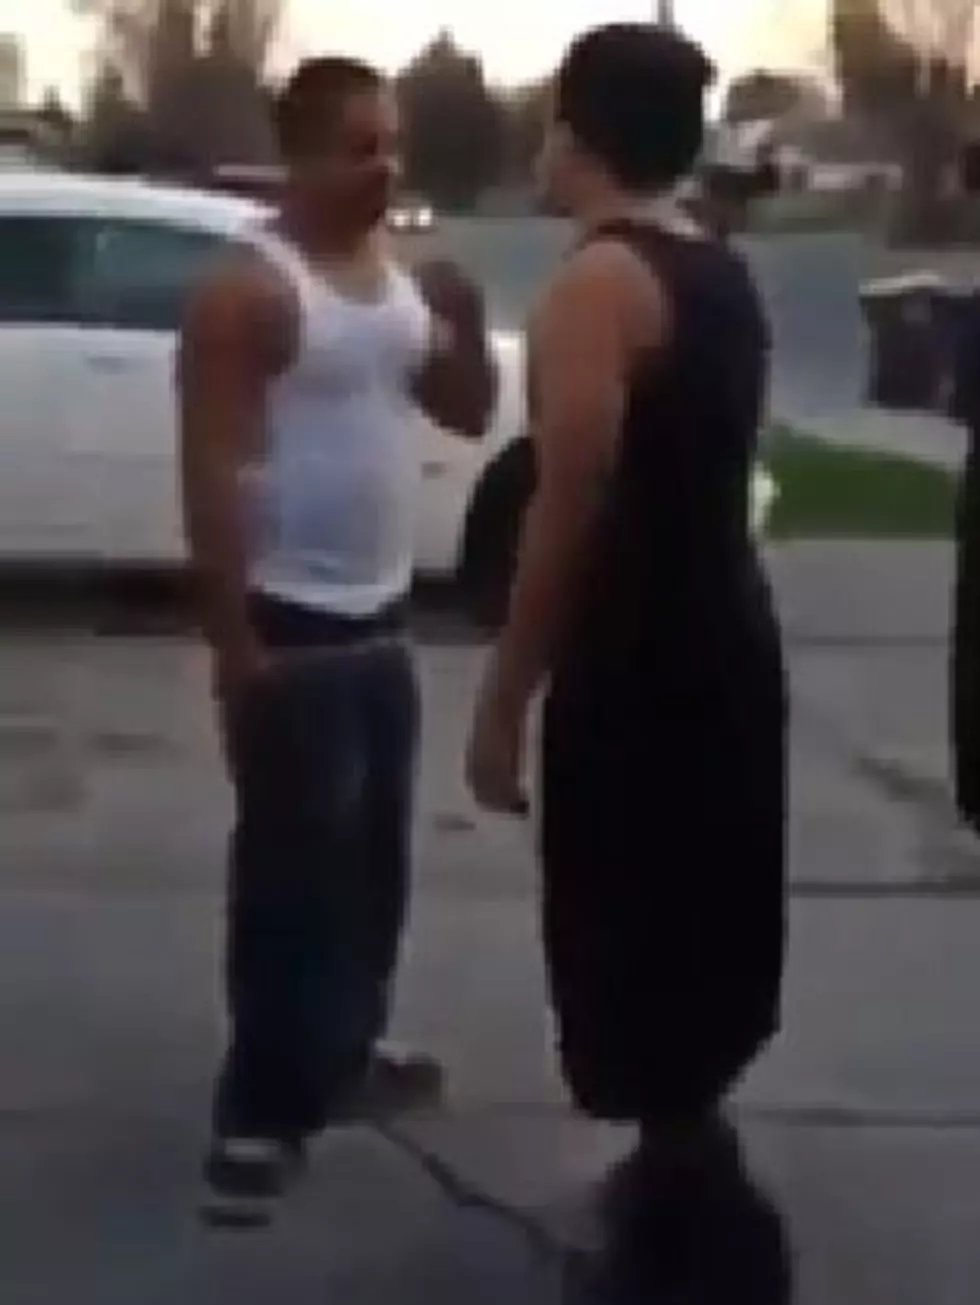 Watch This Teenage Son Protect His Mom By Punching Out Her Boyfriend [GRAPHIC VIDEO]